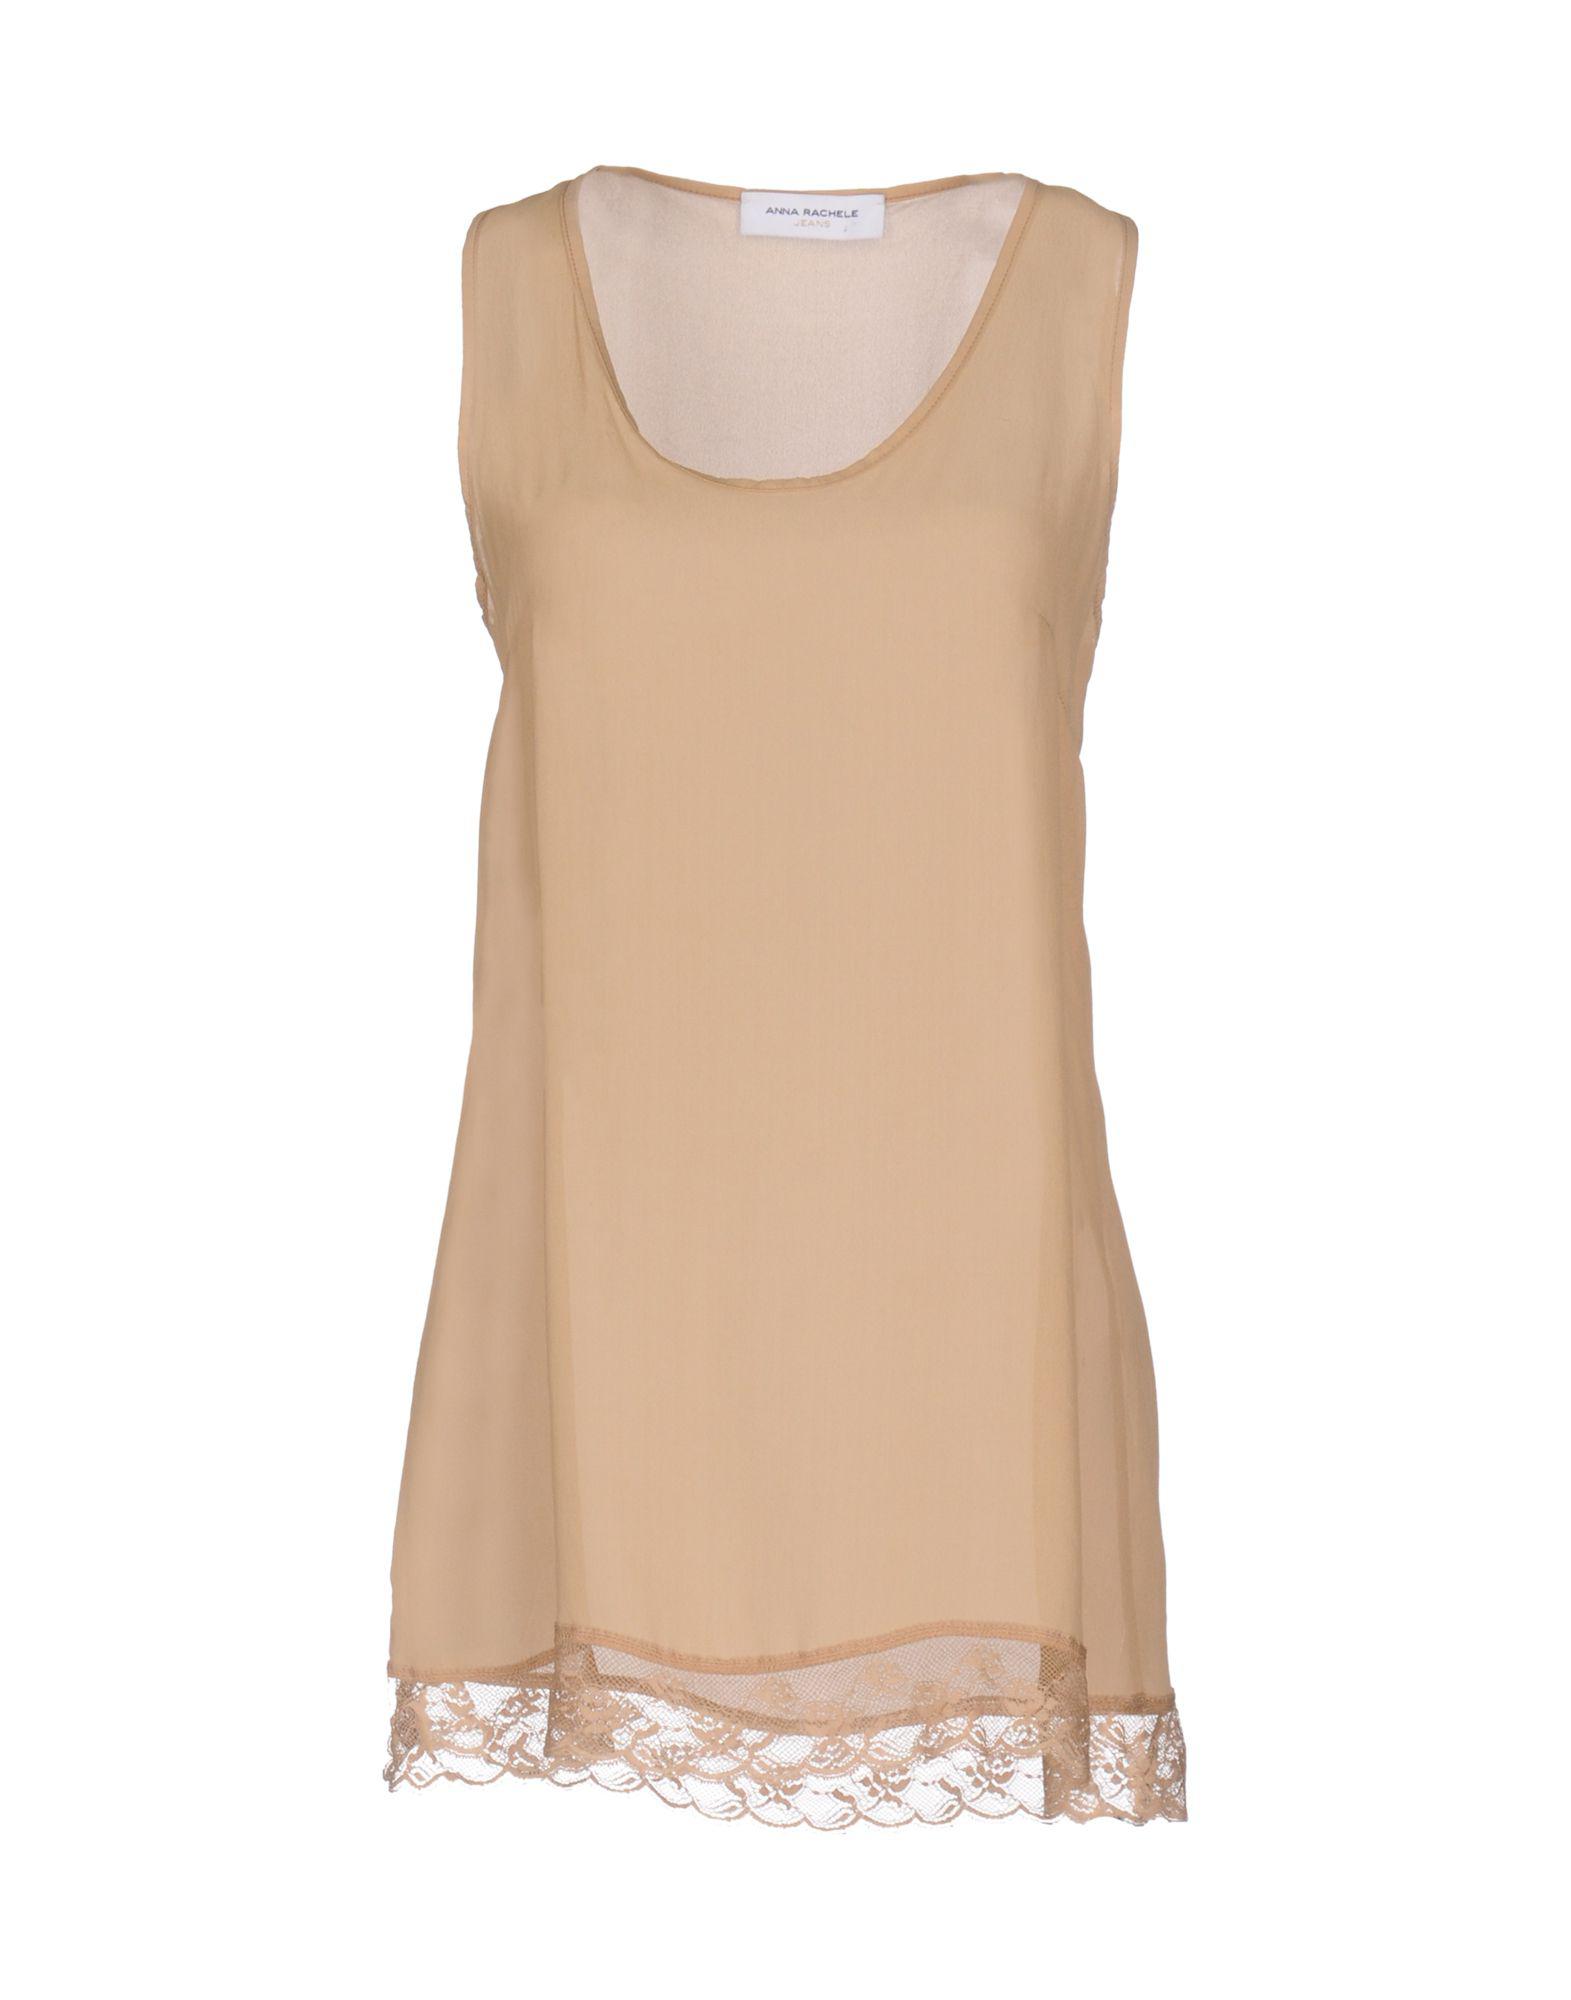 Lyst - Anna Rachele Top in Natural